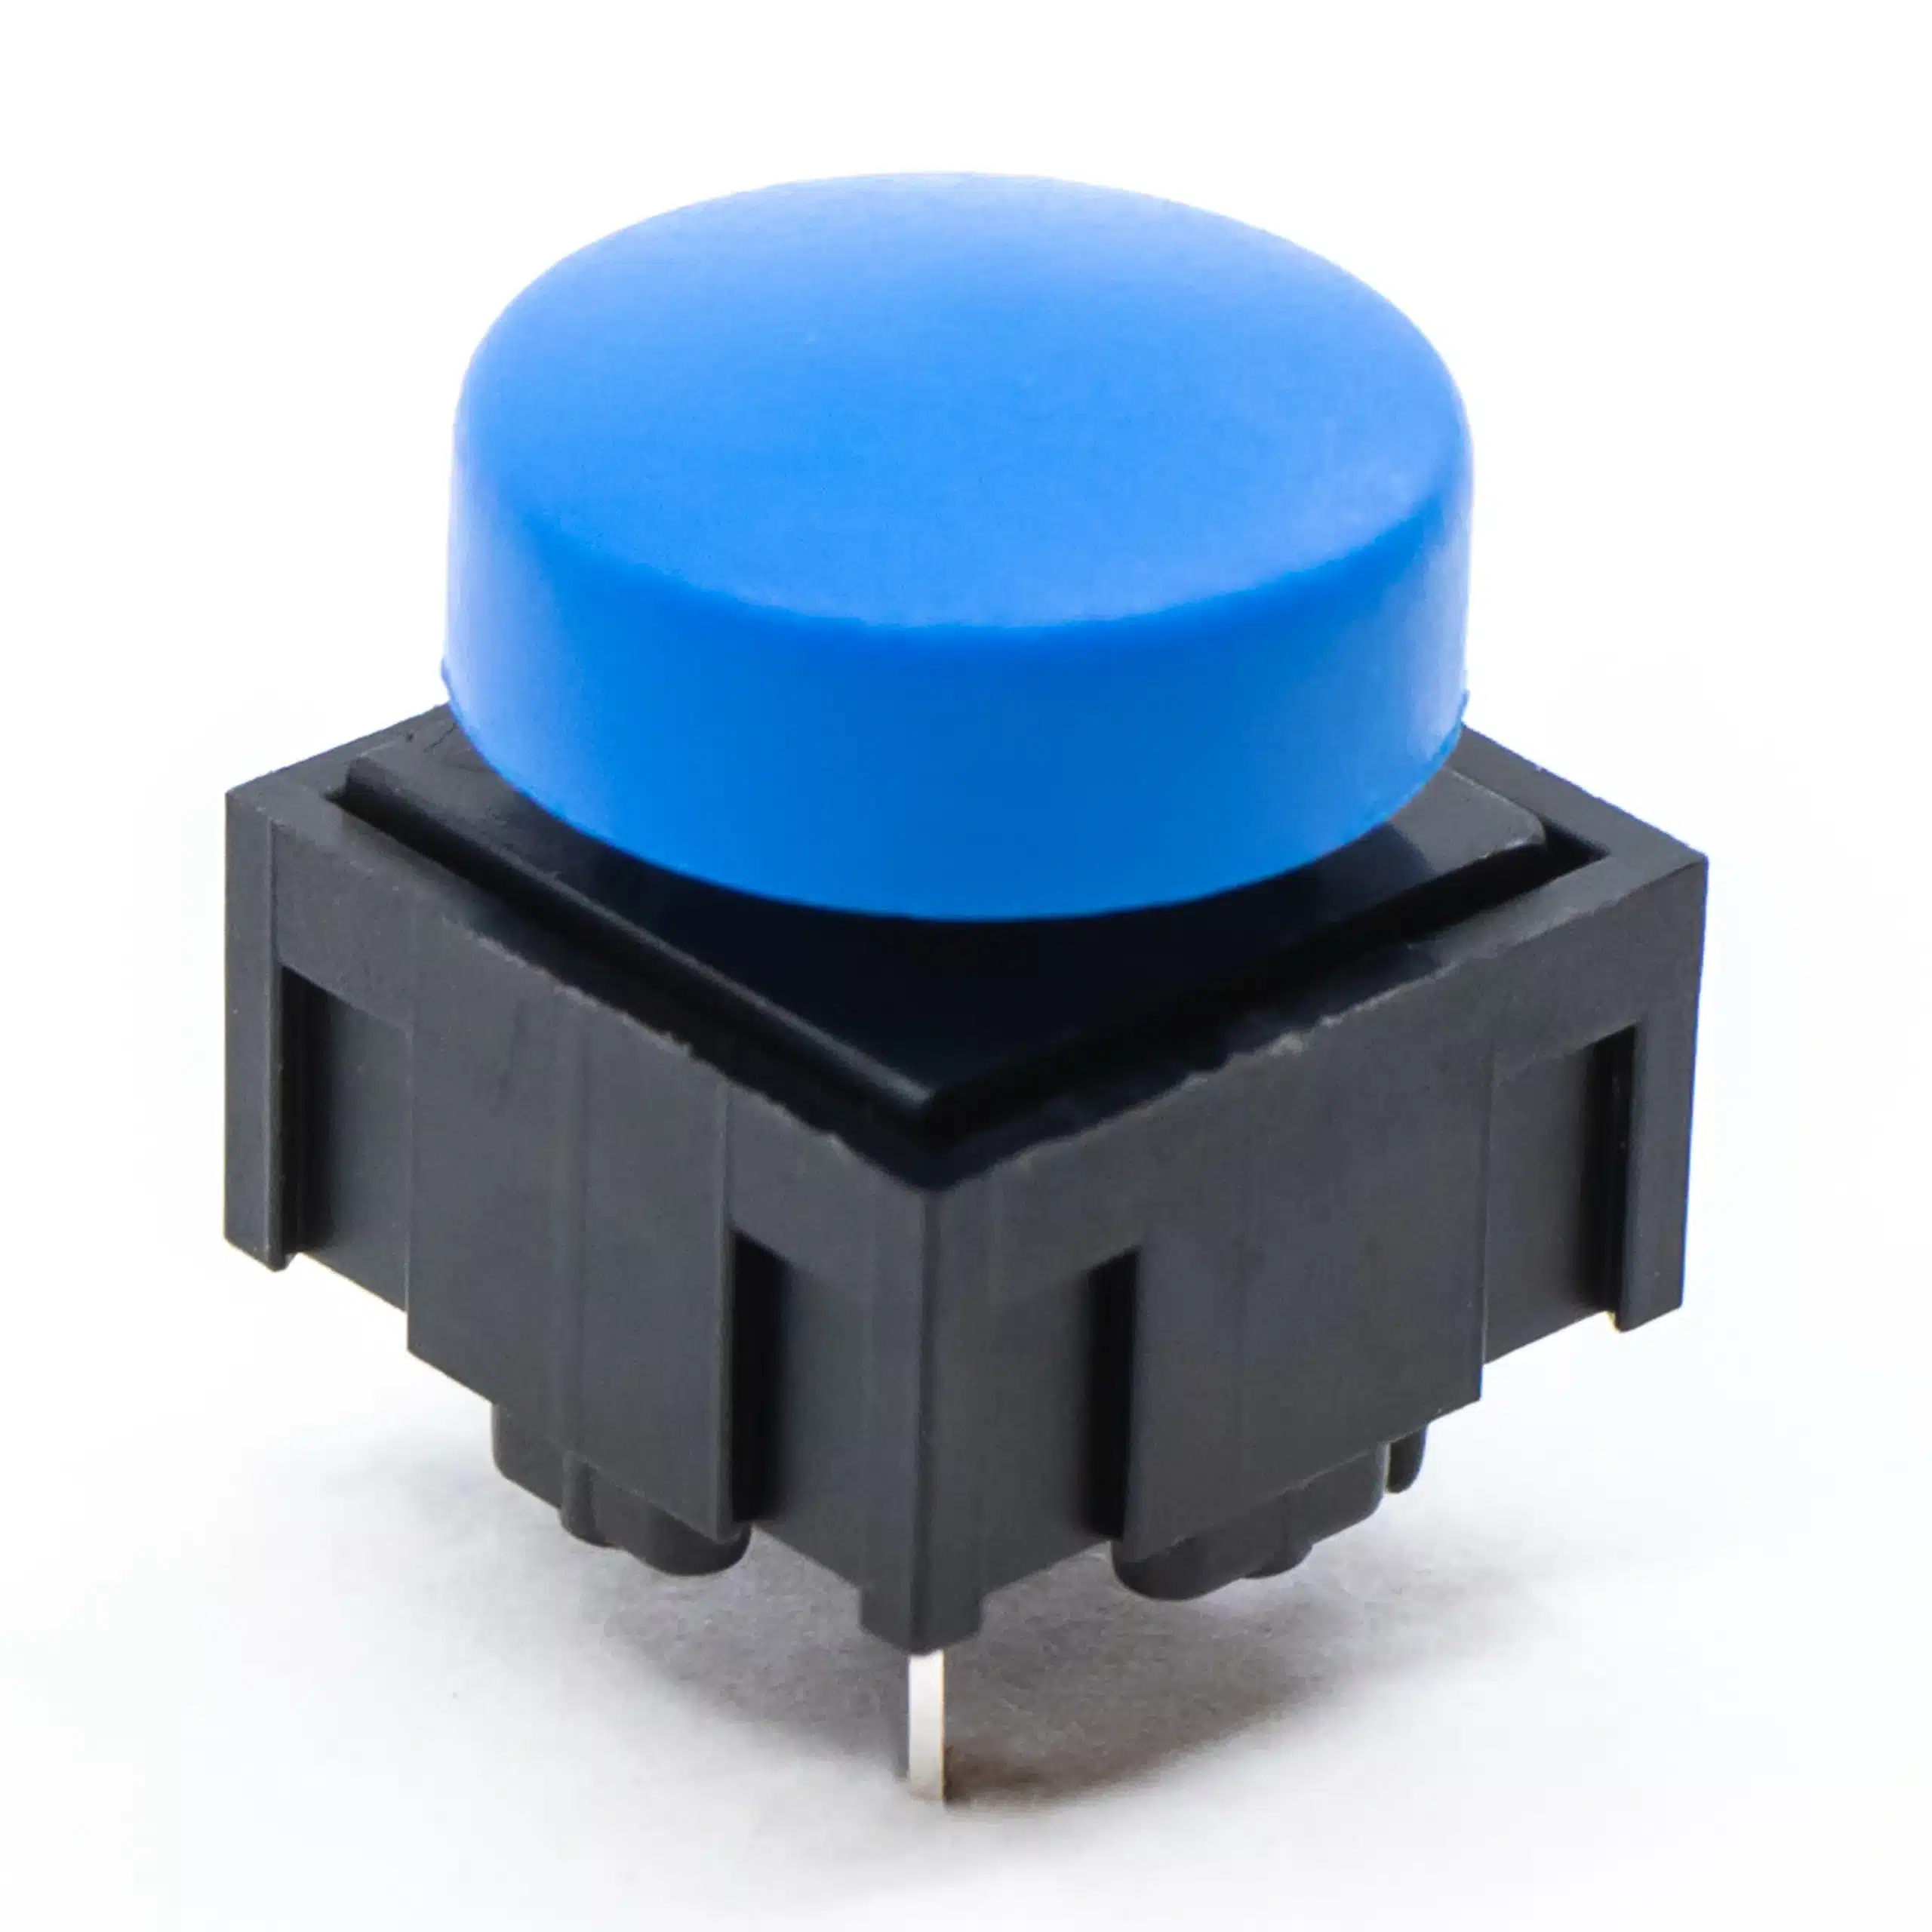 320 Series Tactile Pushbutton Switch